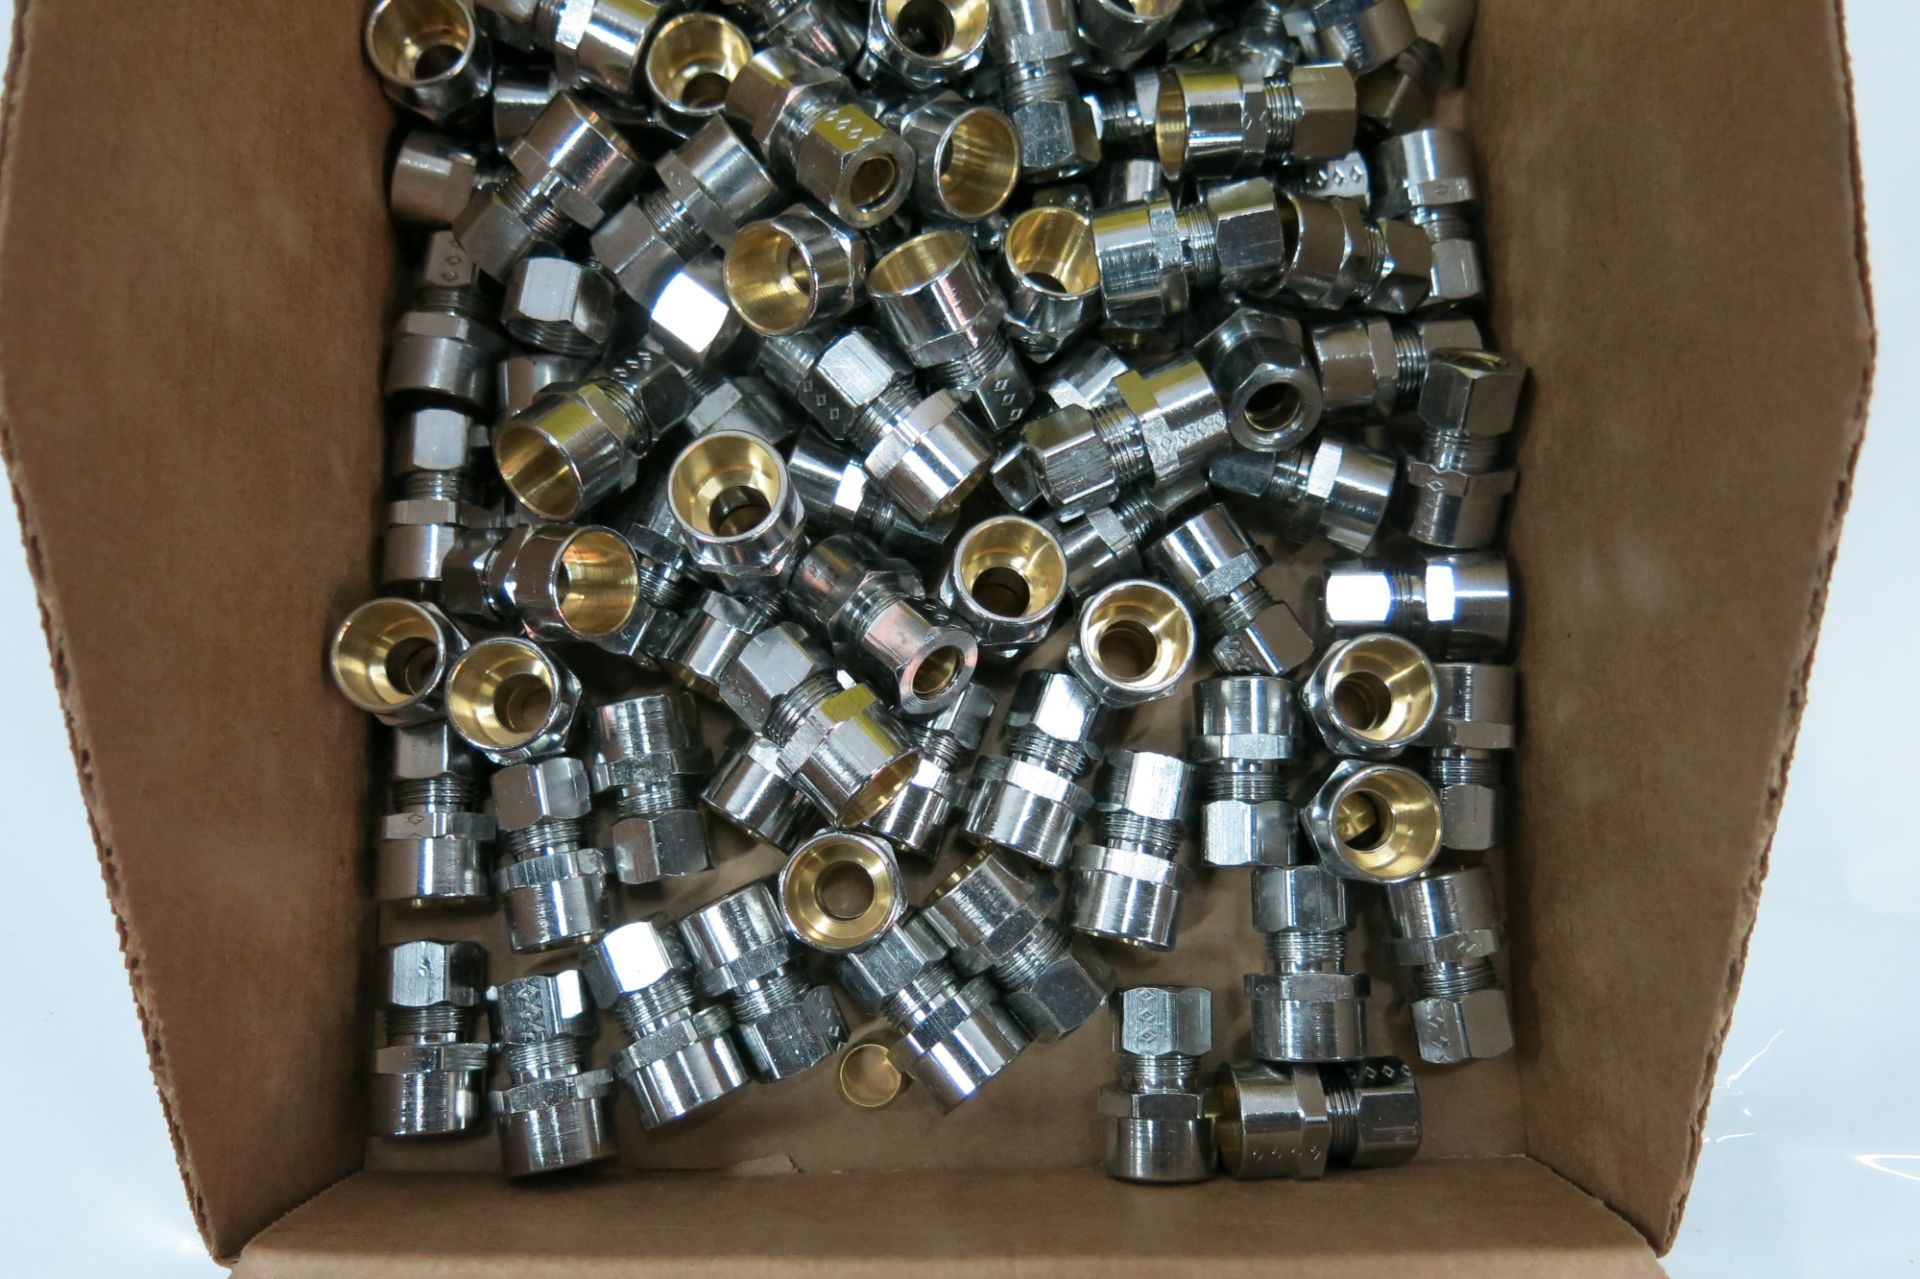 LOT OF 1/2" COUPLINGS WITH COMPRESSION FITTING - NEW (LOCATED IN SCARBOROUGH) - Image 2 of 9